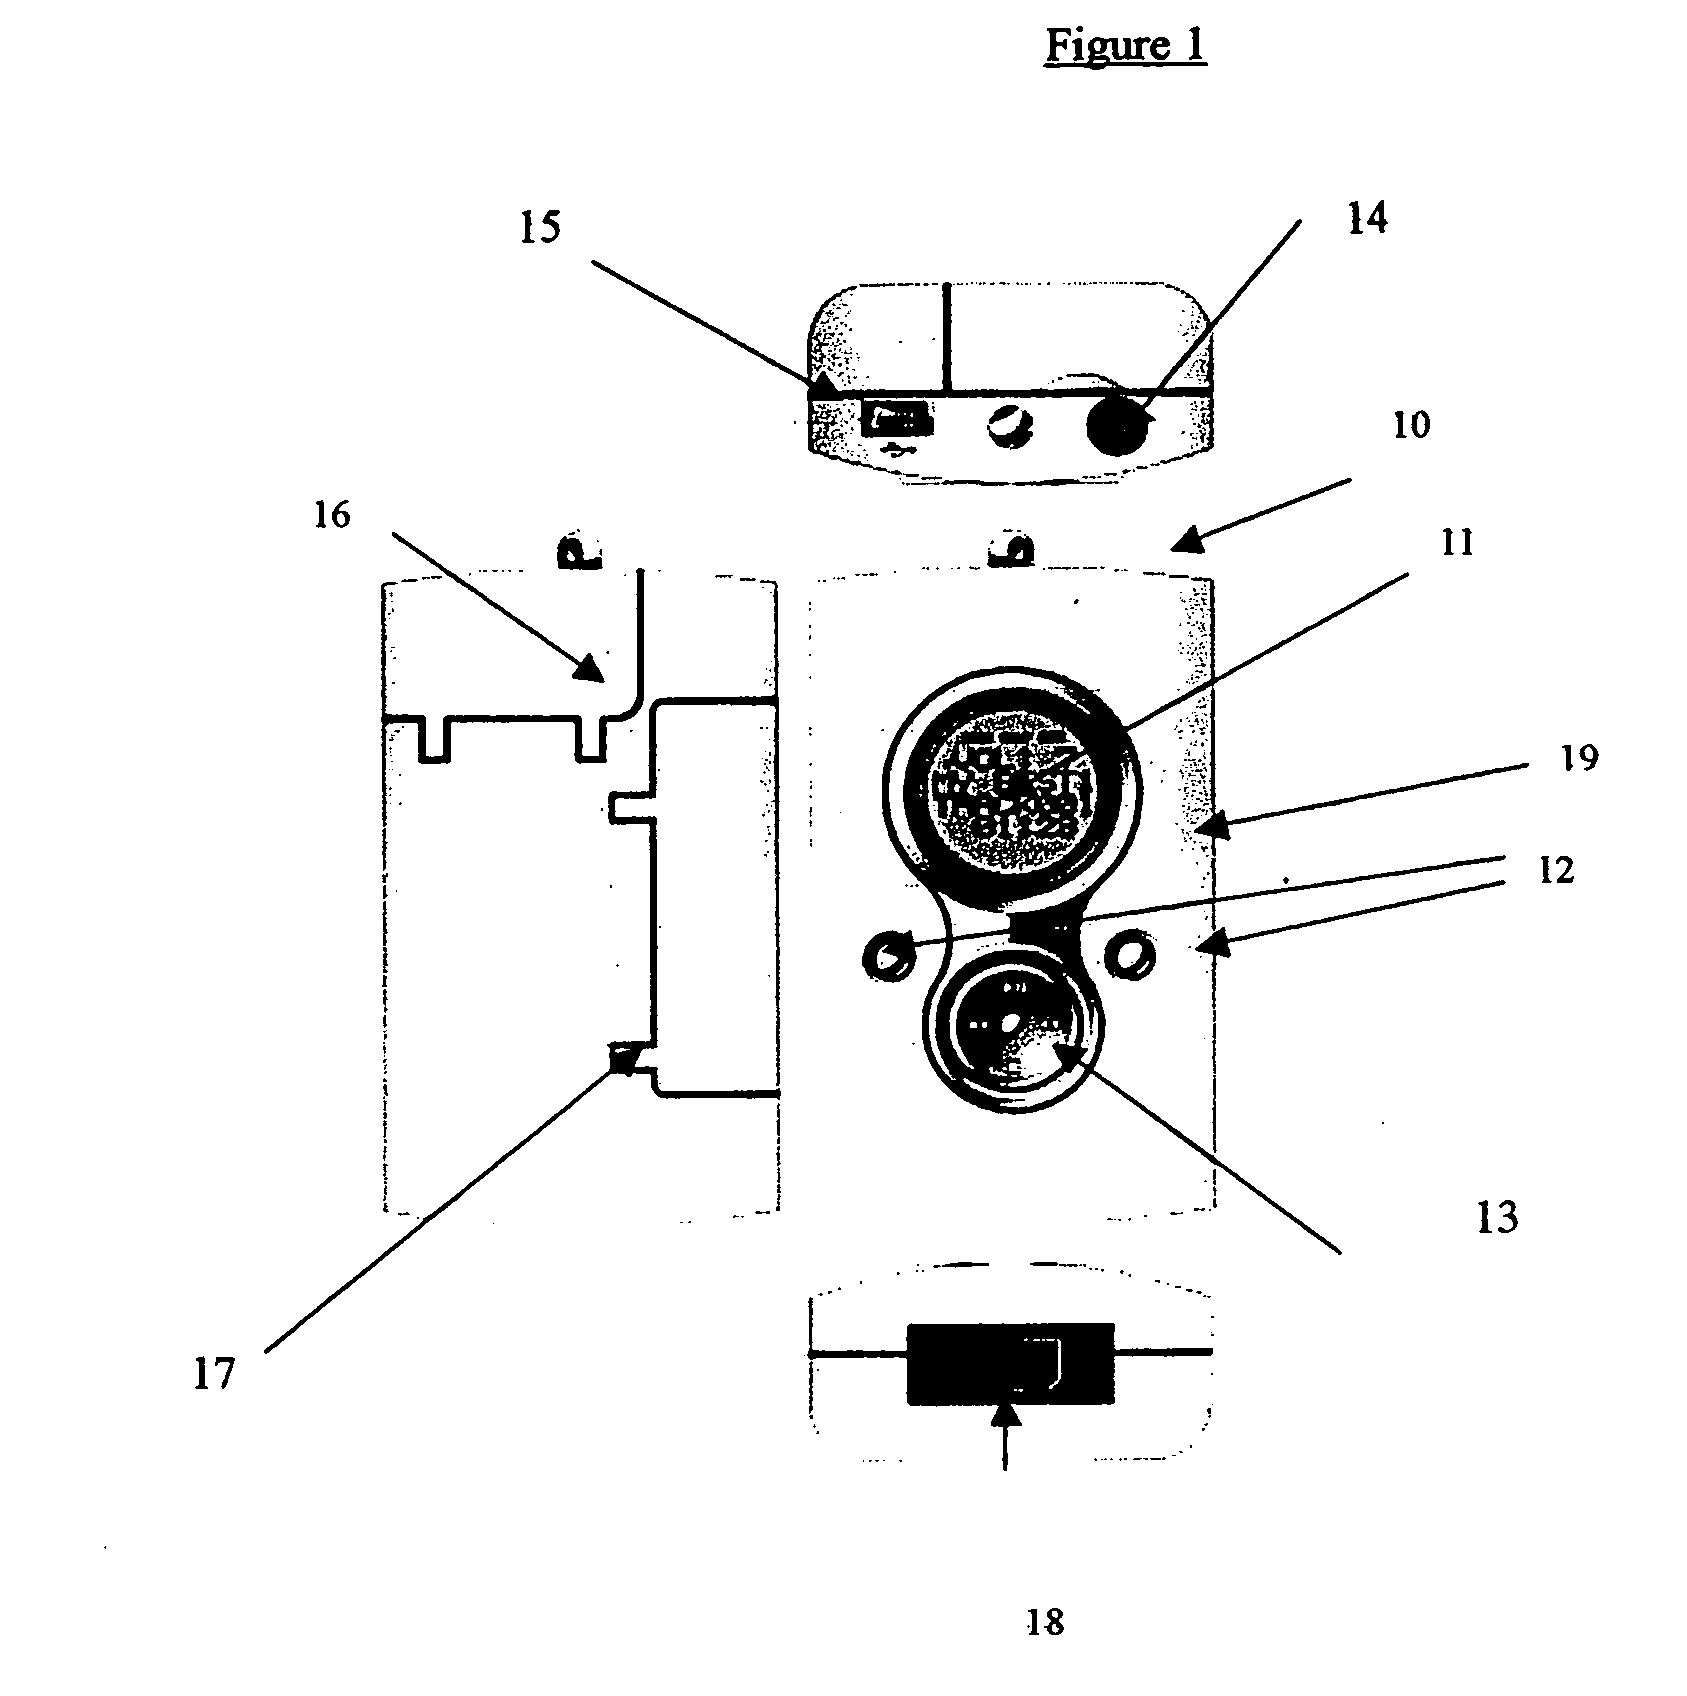 Wireless transmission interface and method